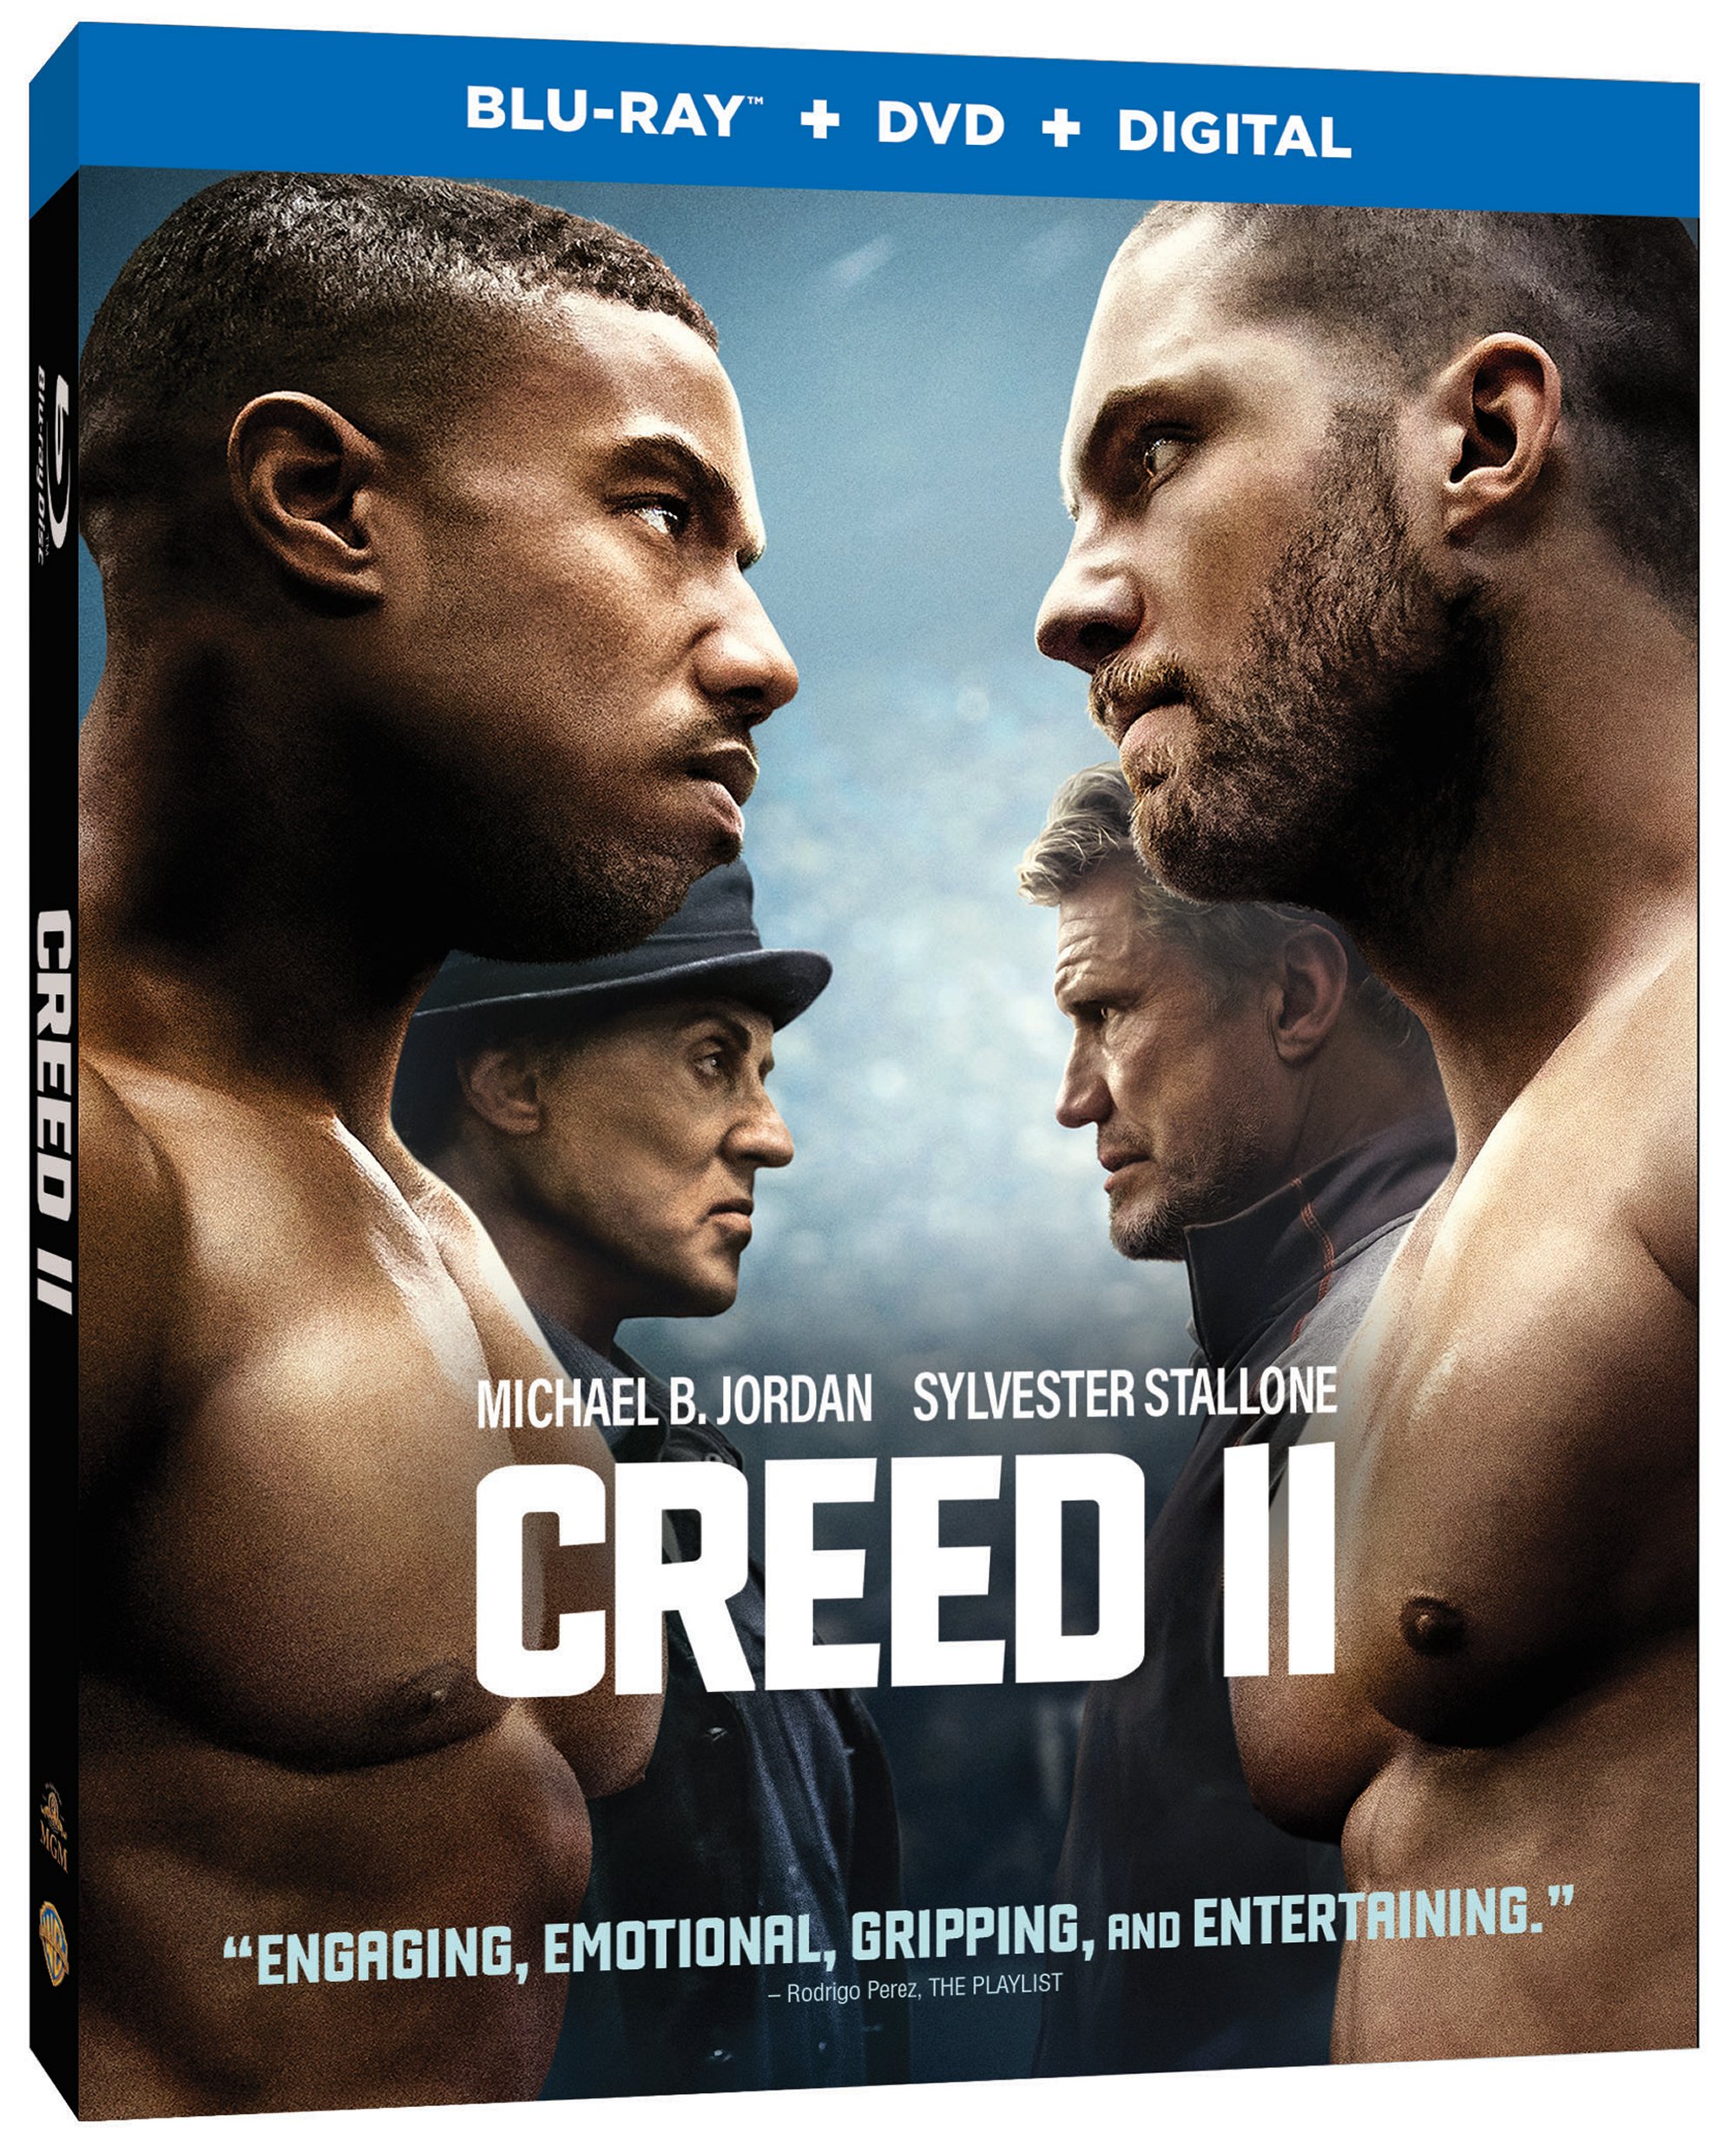 Creed 2 Blu-Ray Combo Pack cover (Warner Bros. Home Entertainment)